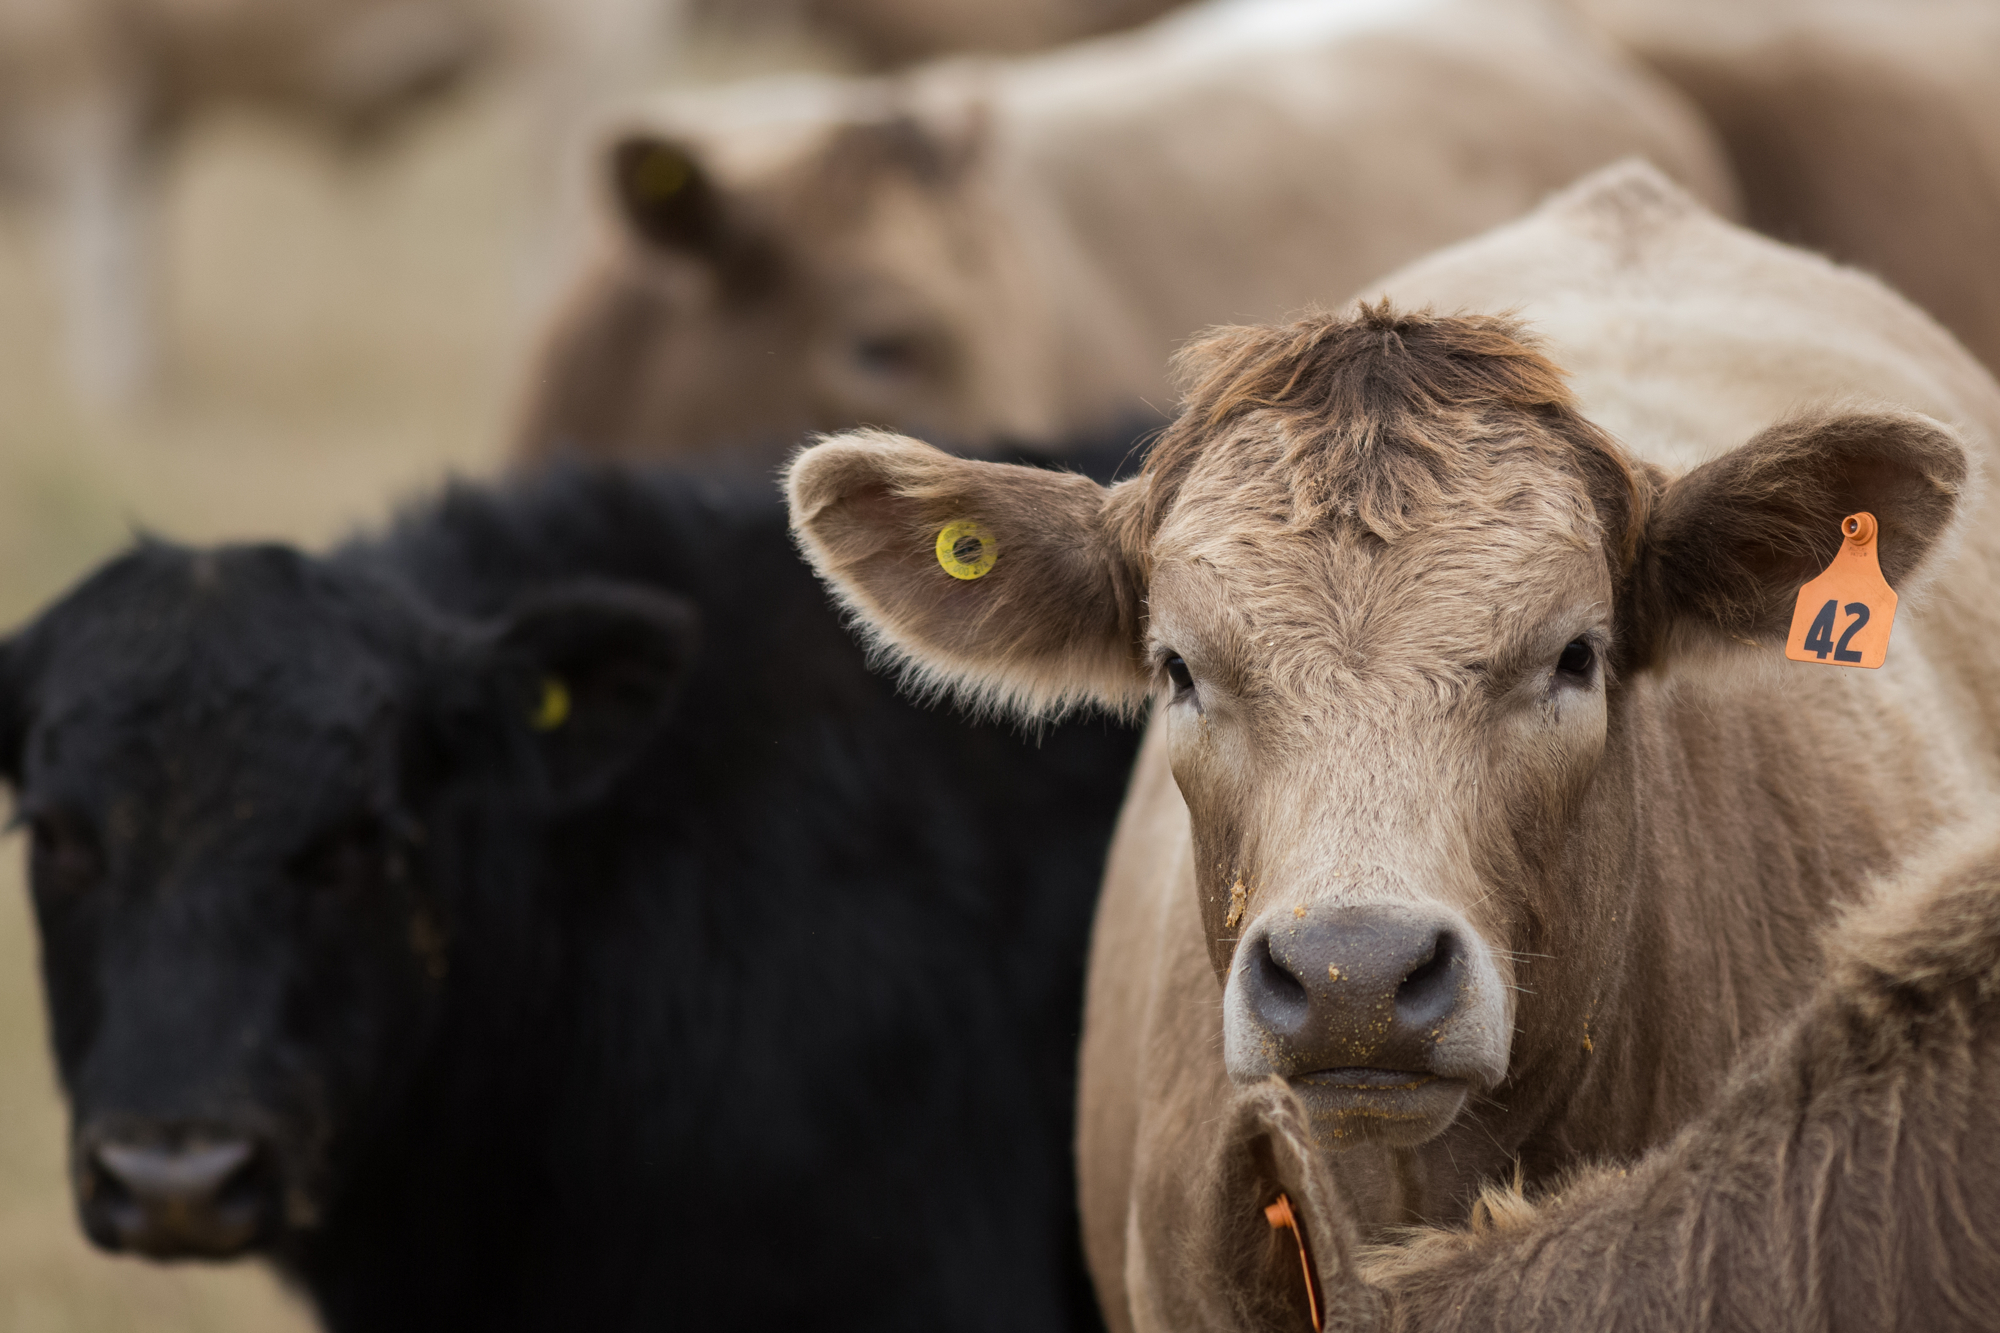 Rabo Agrifinances Don Close Shares His Top Four Unknown Unknowns of the Beef Industry in 2019